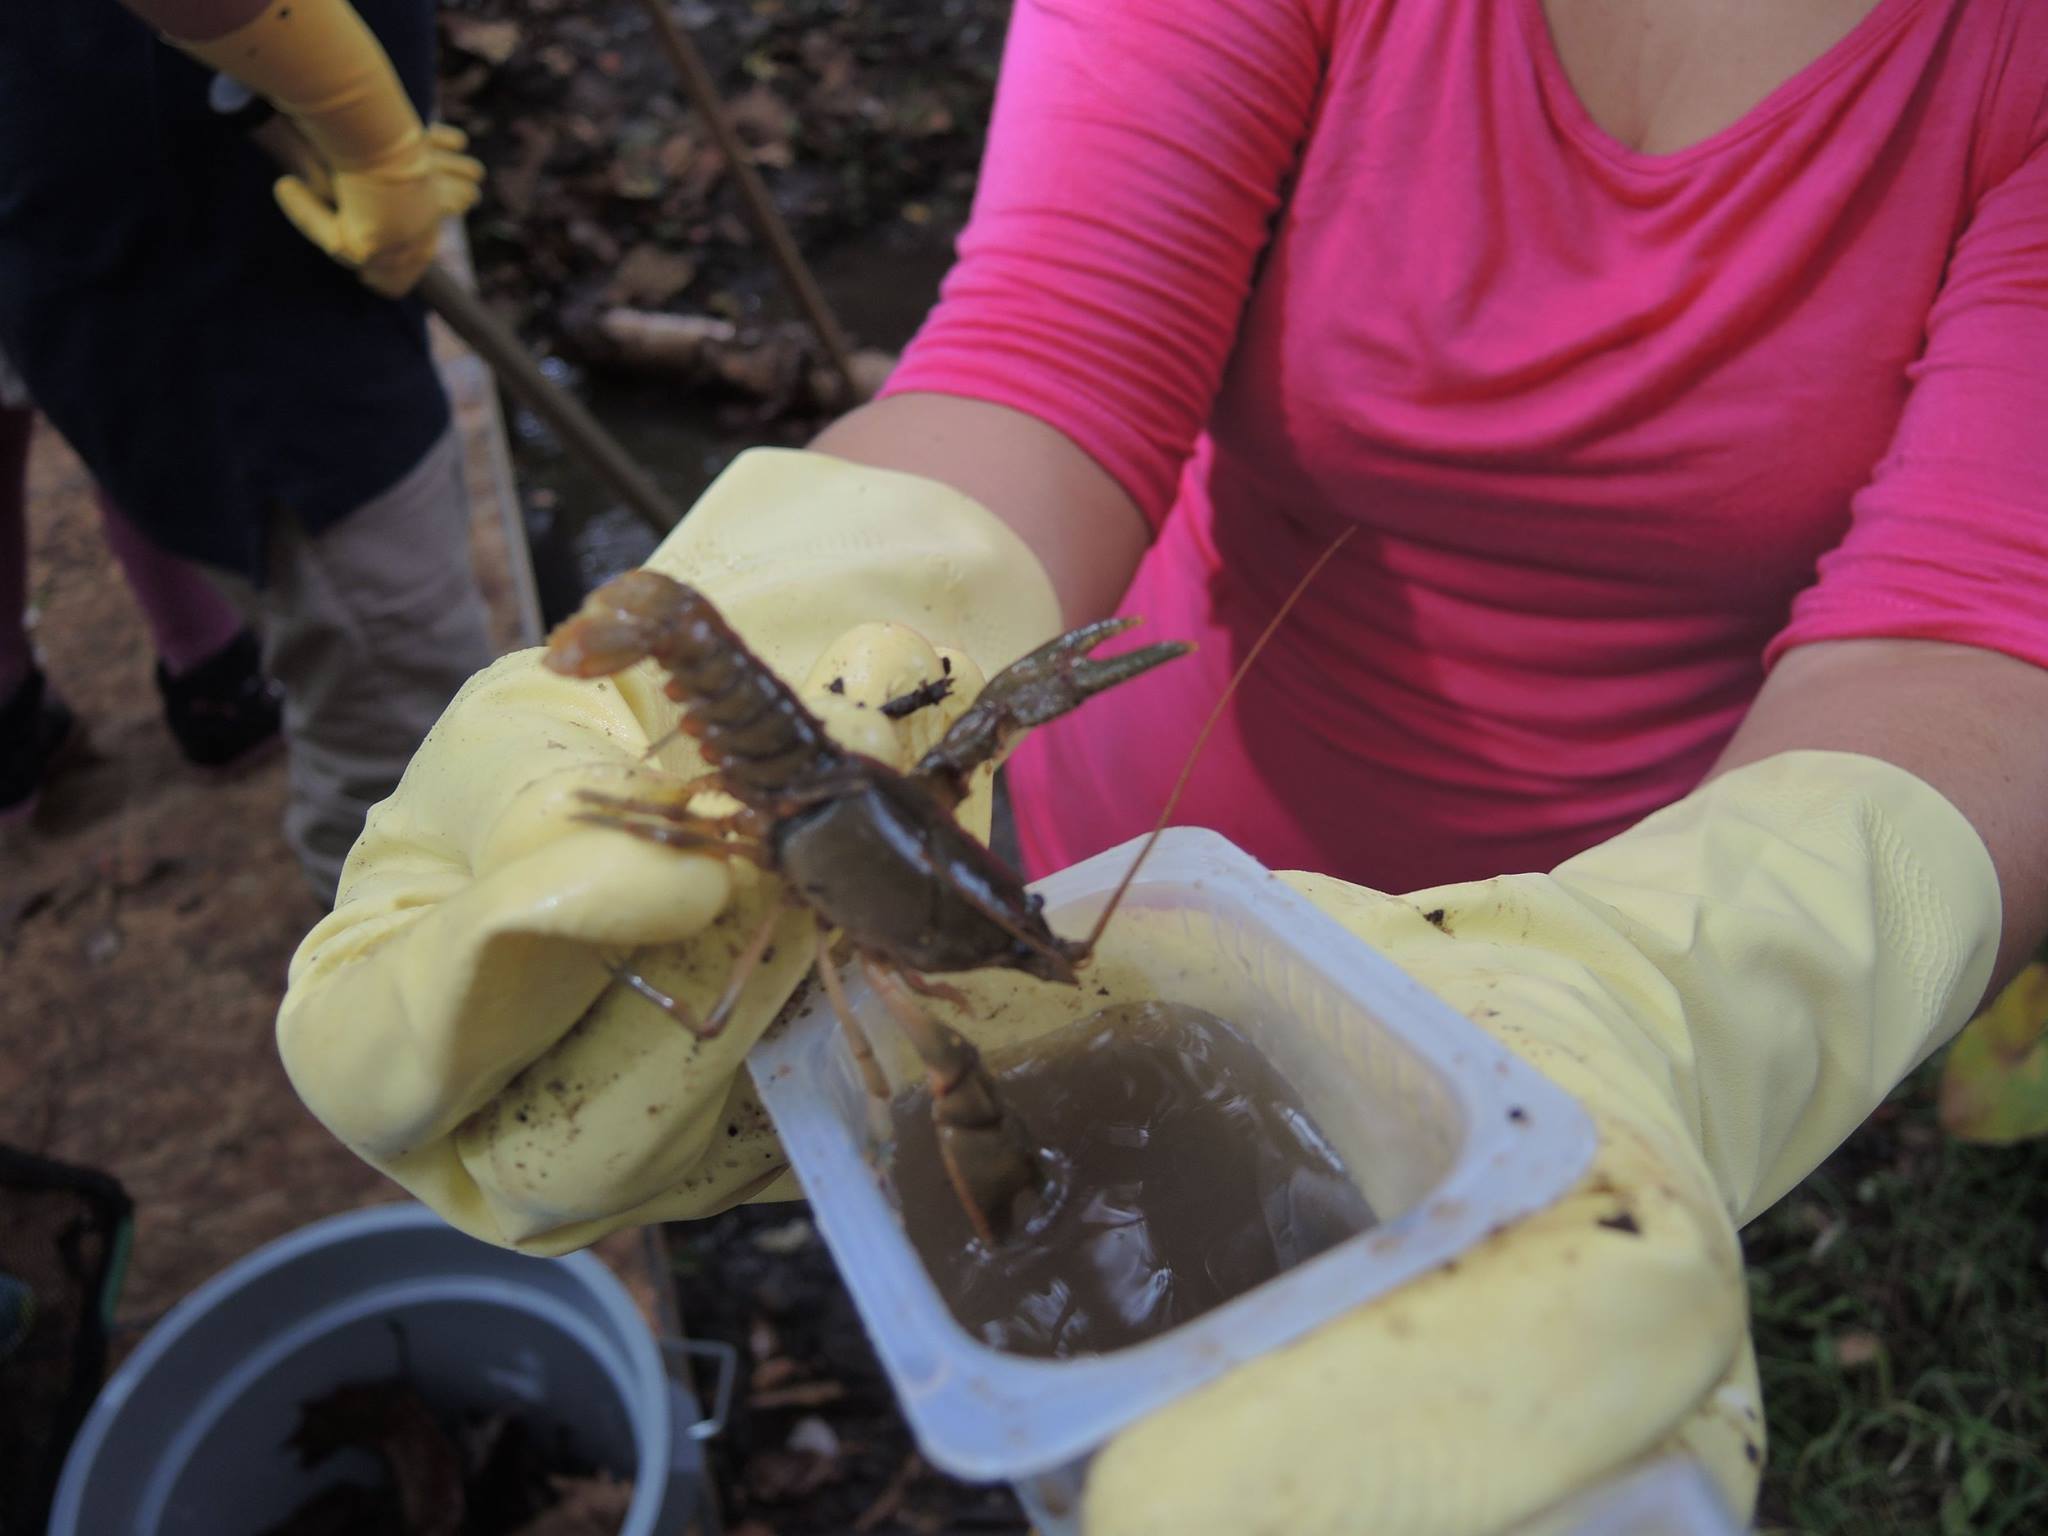 A student with gloves on holds up a crayfish.